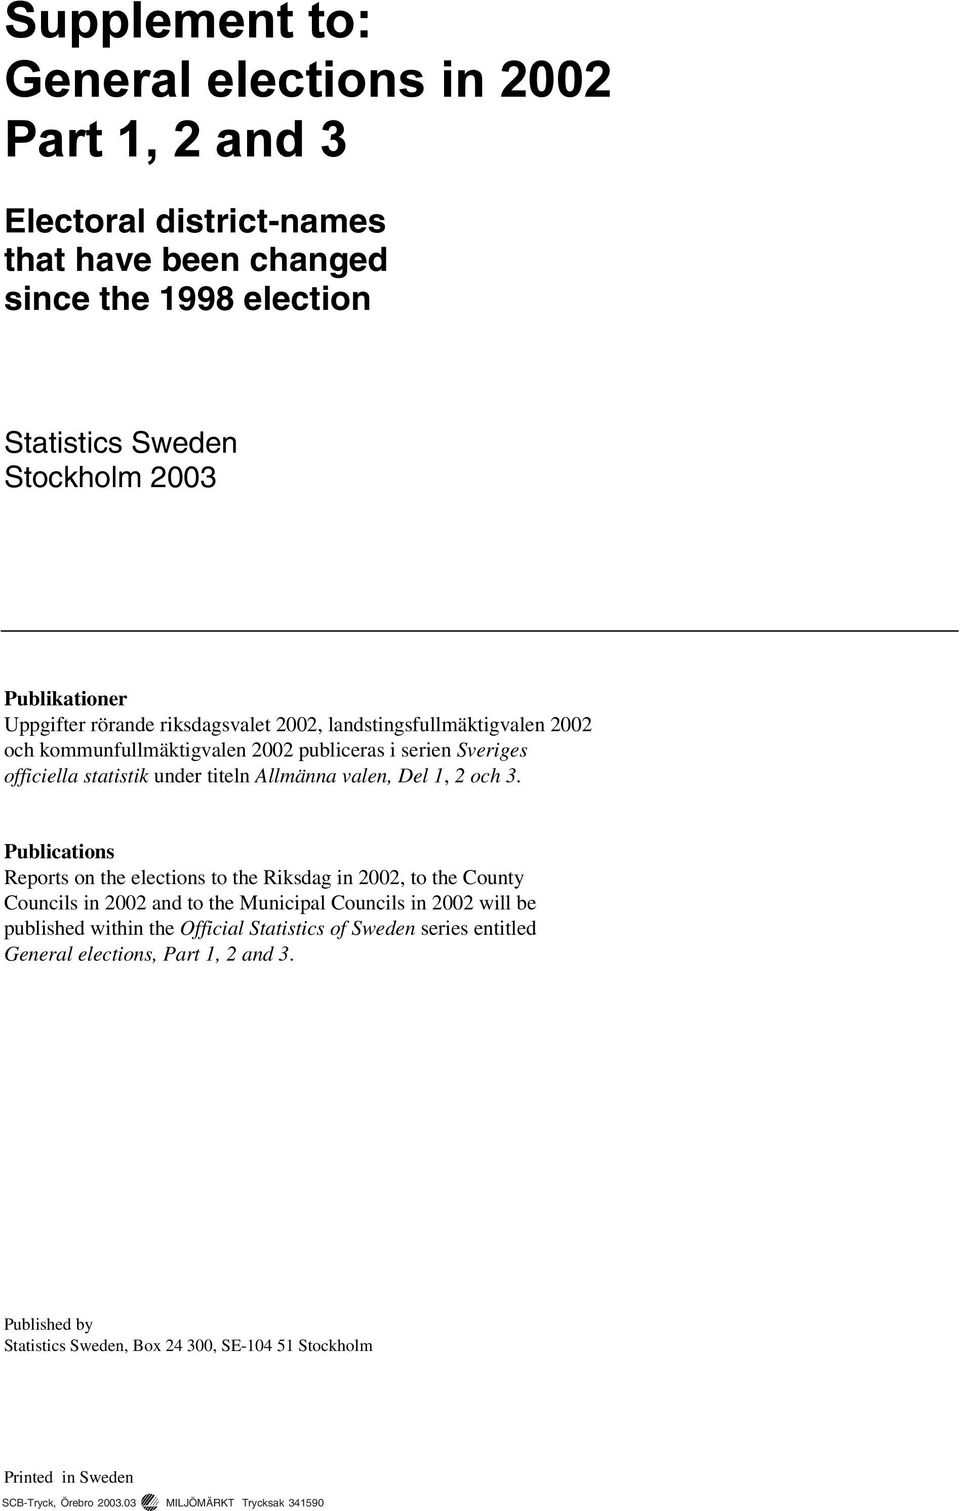 Publications Reports on the elections to the Riksdag in 2002, to the County Councils in 2002 and to the Municipal Councils in 2002 will be published within the Official Statistics of